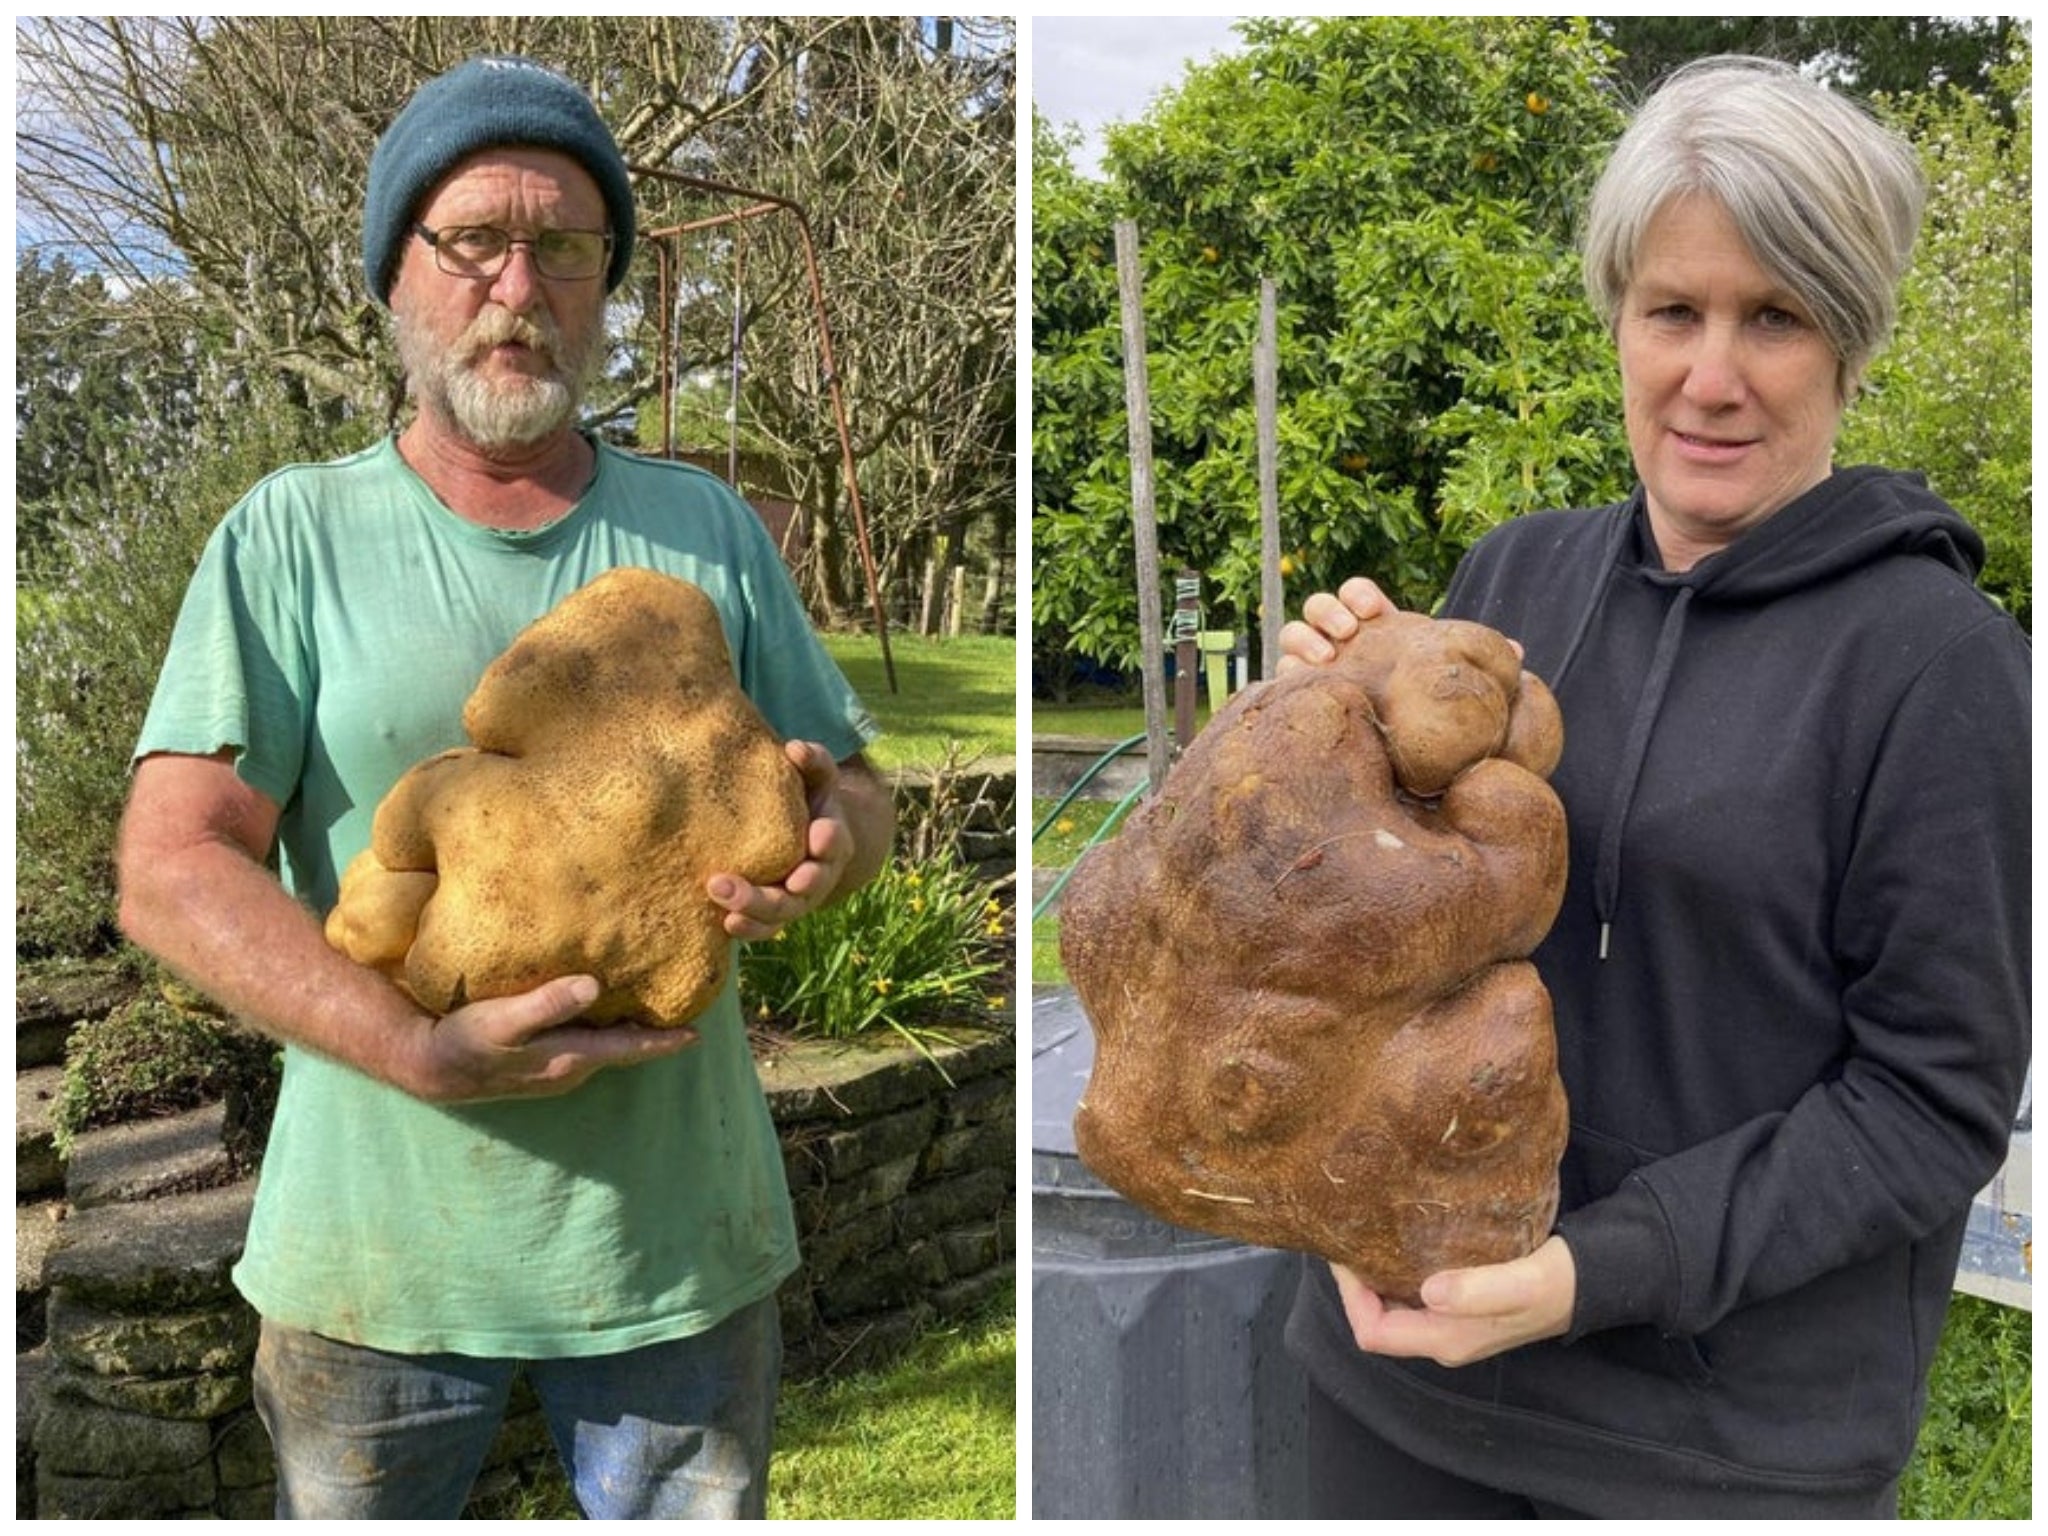 Colin and Donna Craig-Brown holding a large potato dug from their garden at their home near Hamilton, New Zealand